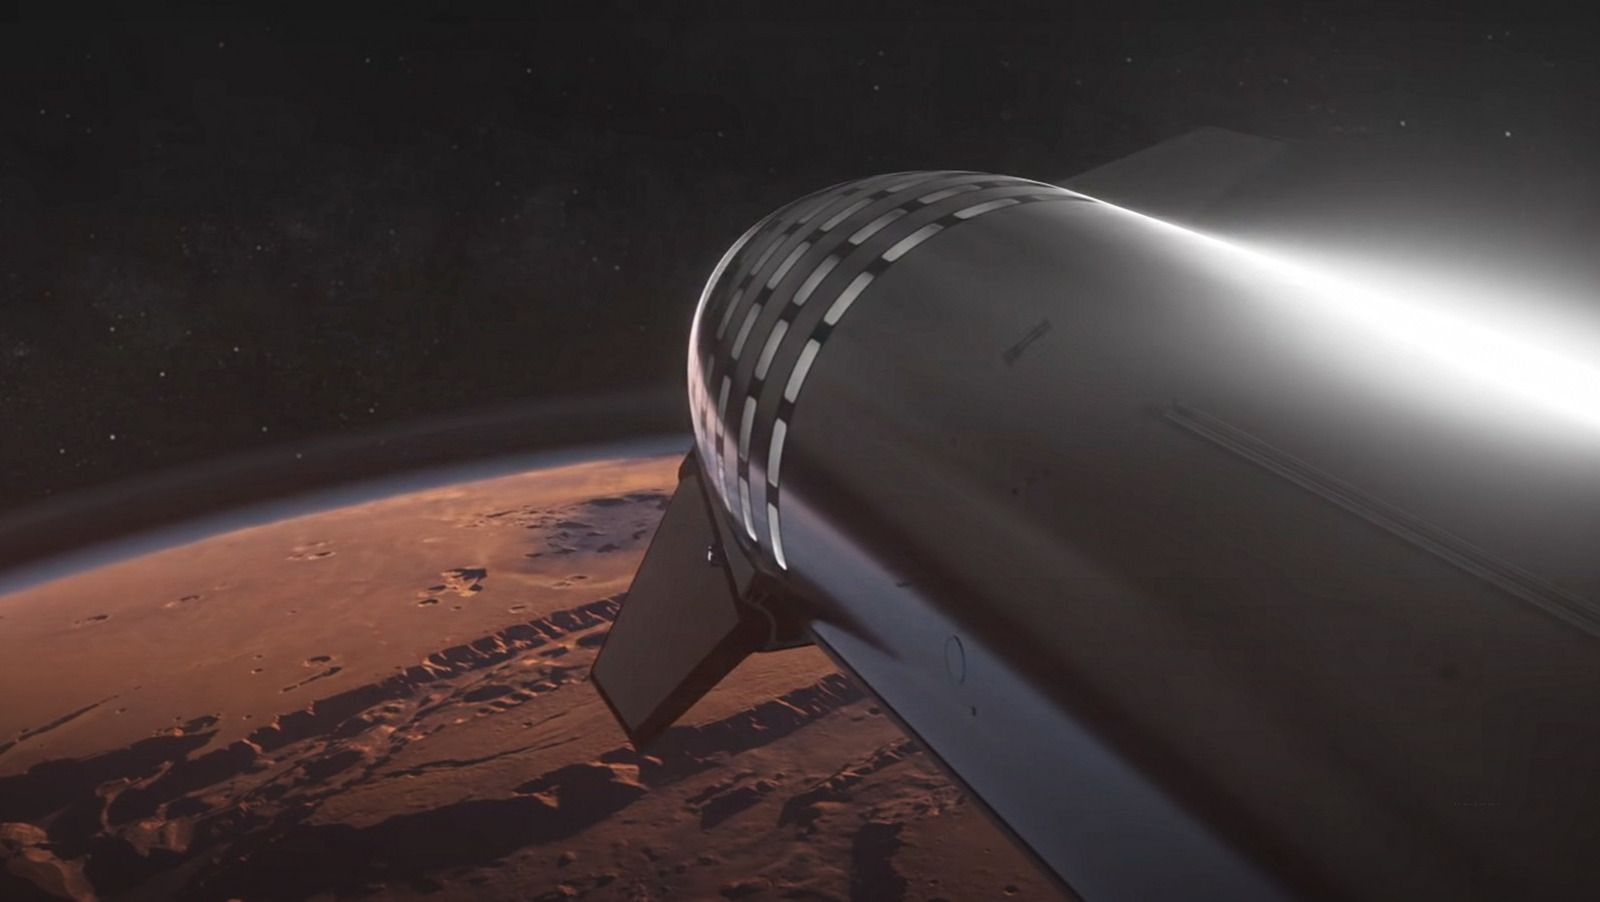 What Elon Musk Has To Say About Sending A Starship To Mars